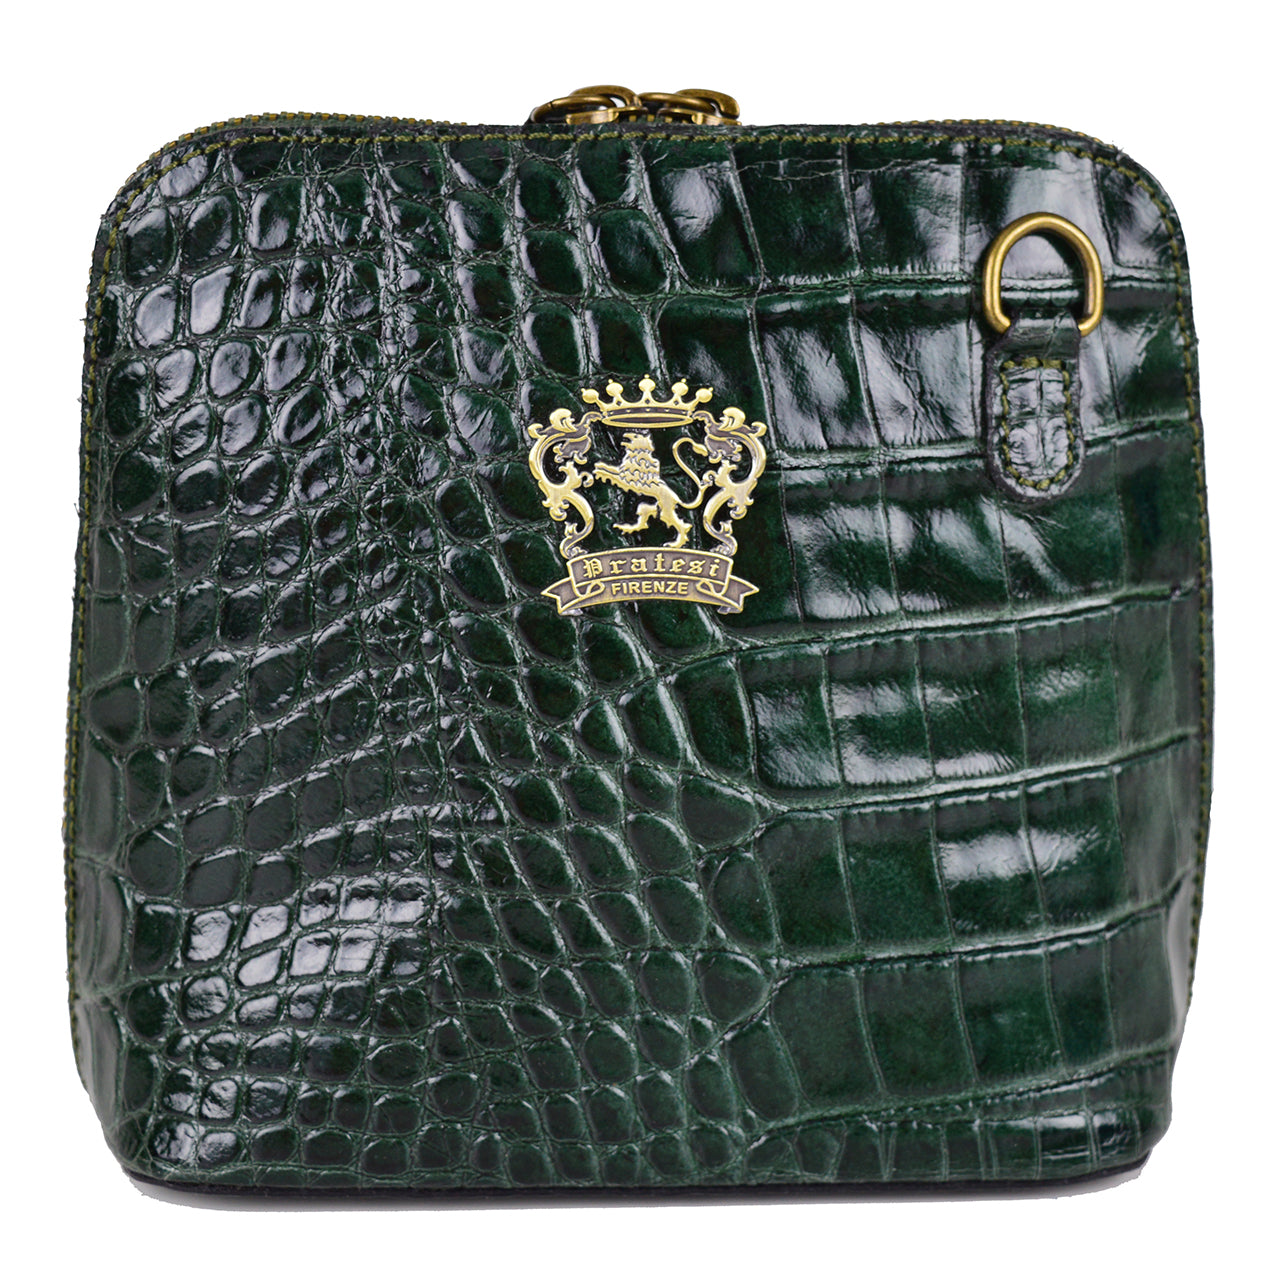 Pratesi Volterra King Lady Bag in real leather - Croco Embossed Leather Dark Green